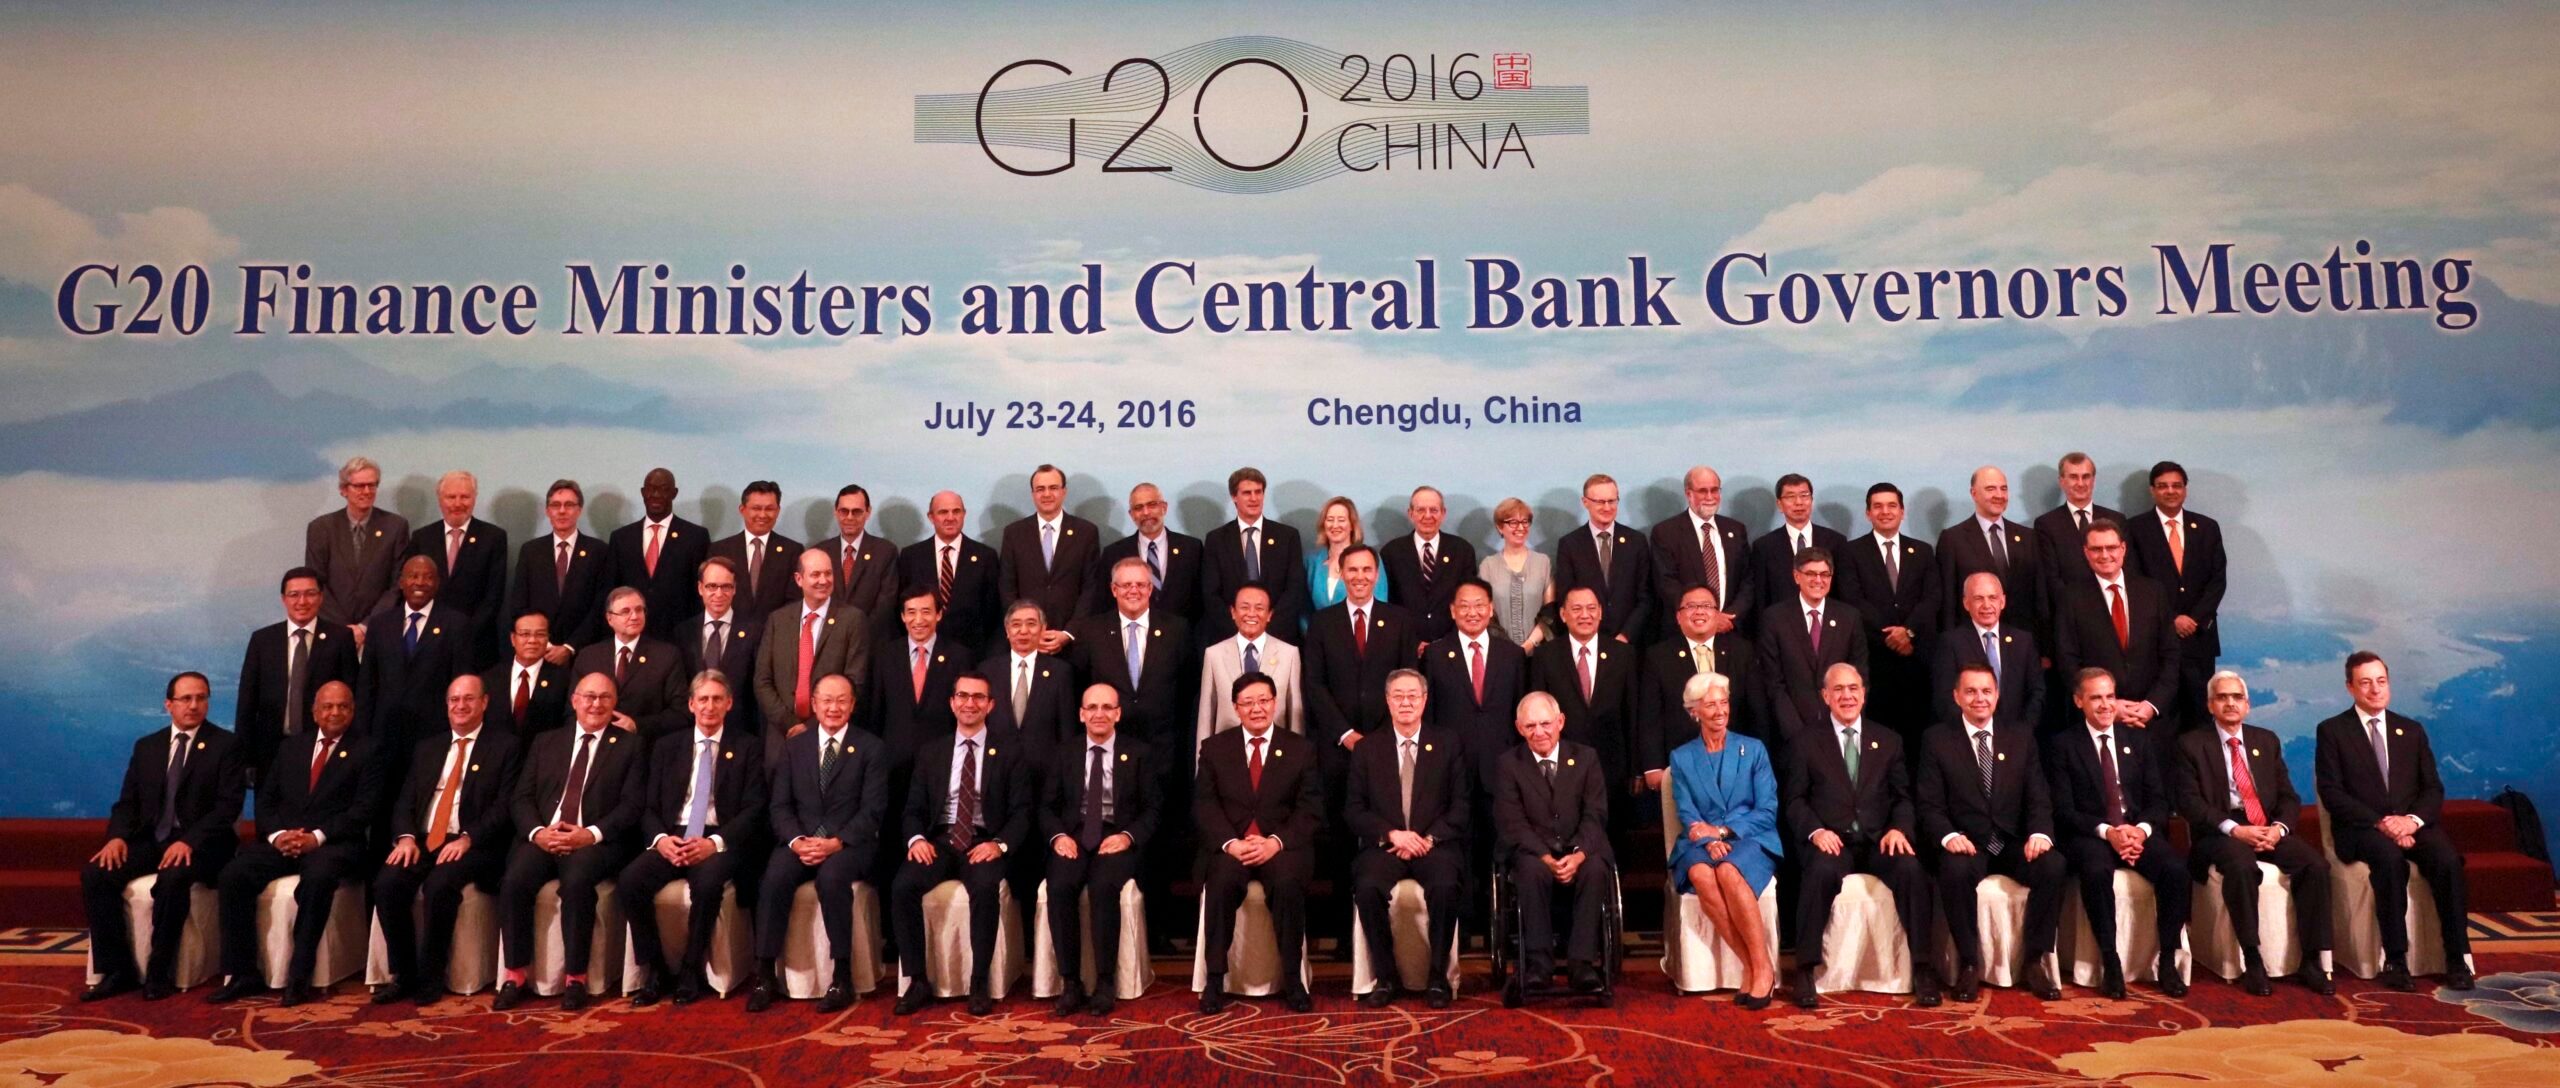 Brexit is risk to global growth, says G20